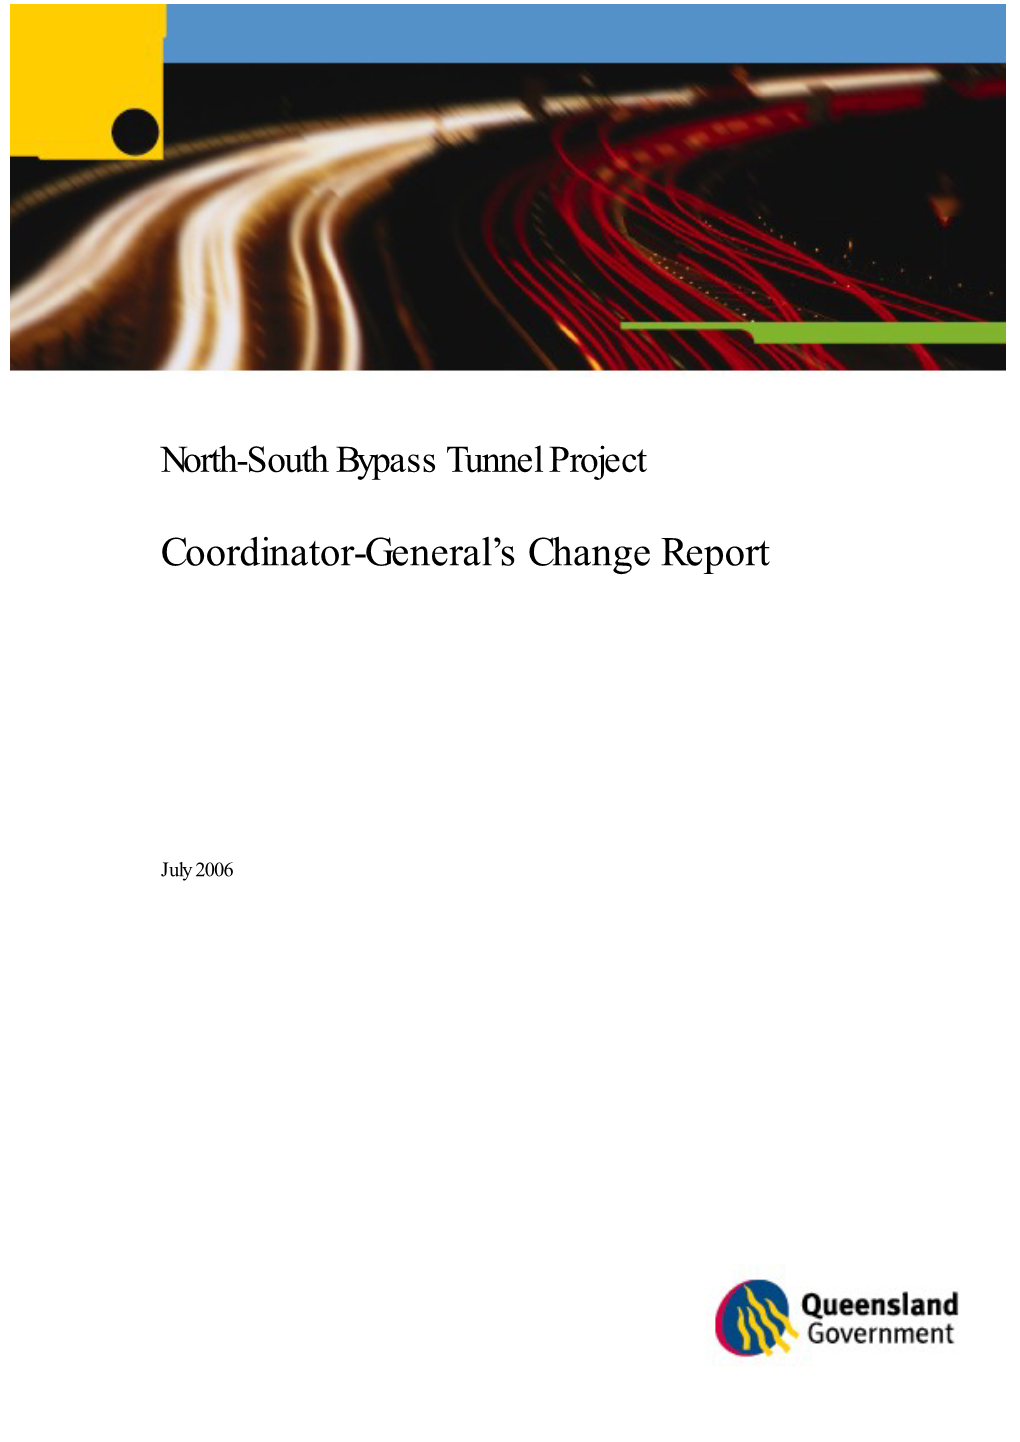 Coordinator-General's Report on Project Change